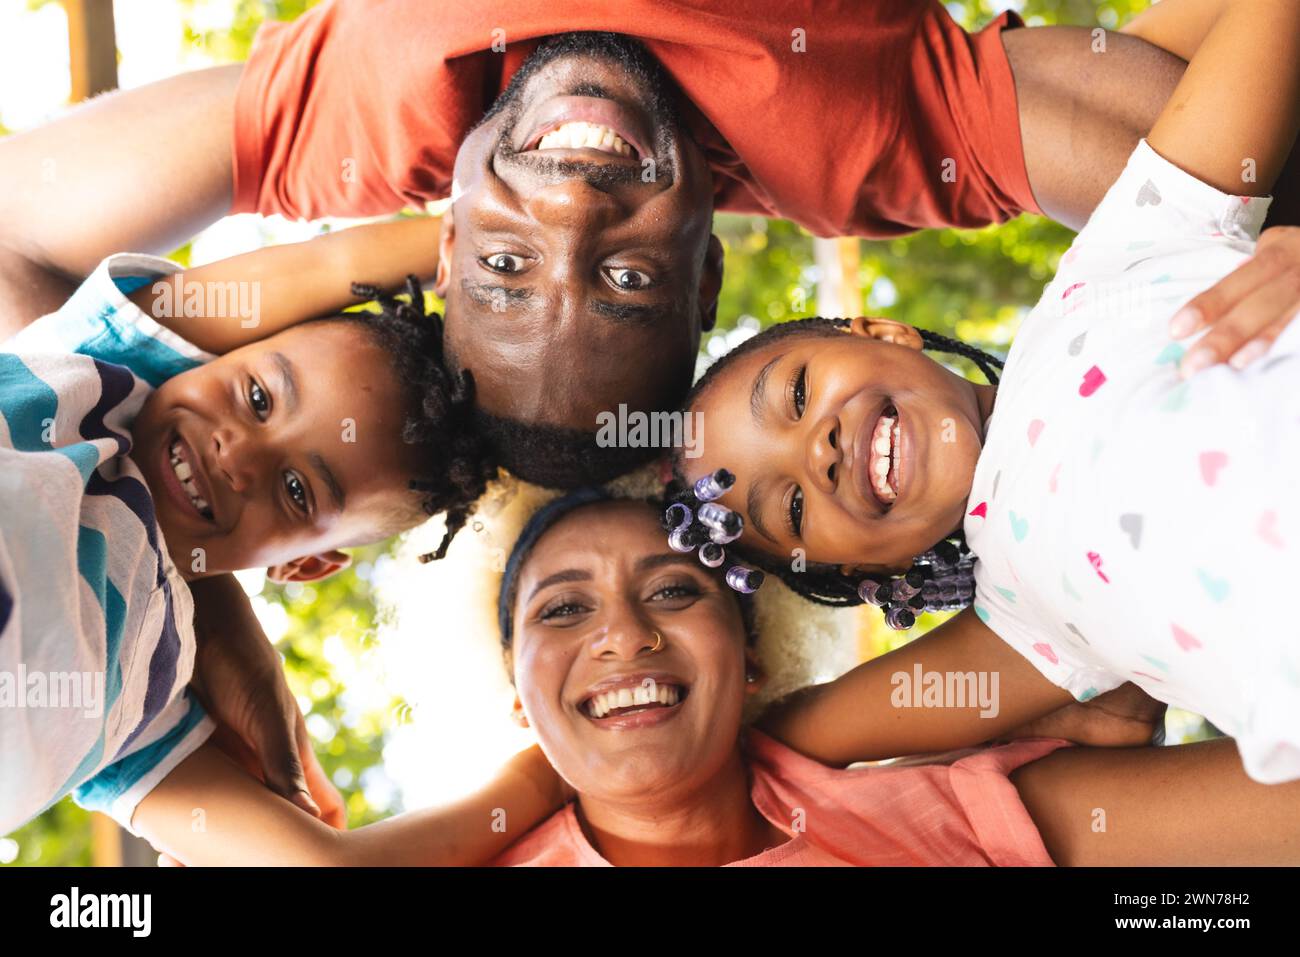 Diverse family forms a circle, smiling faces looking down at the camera Stock Photo